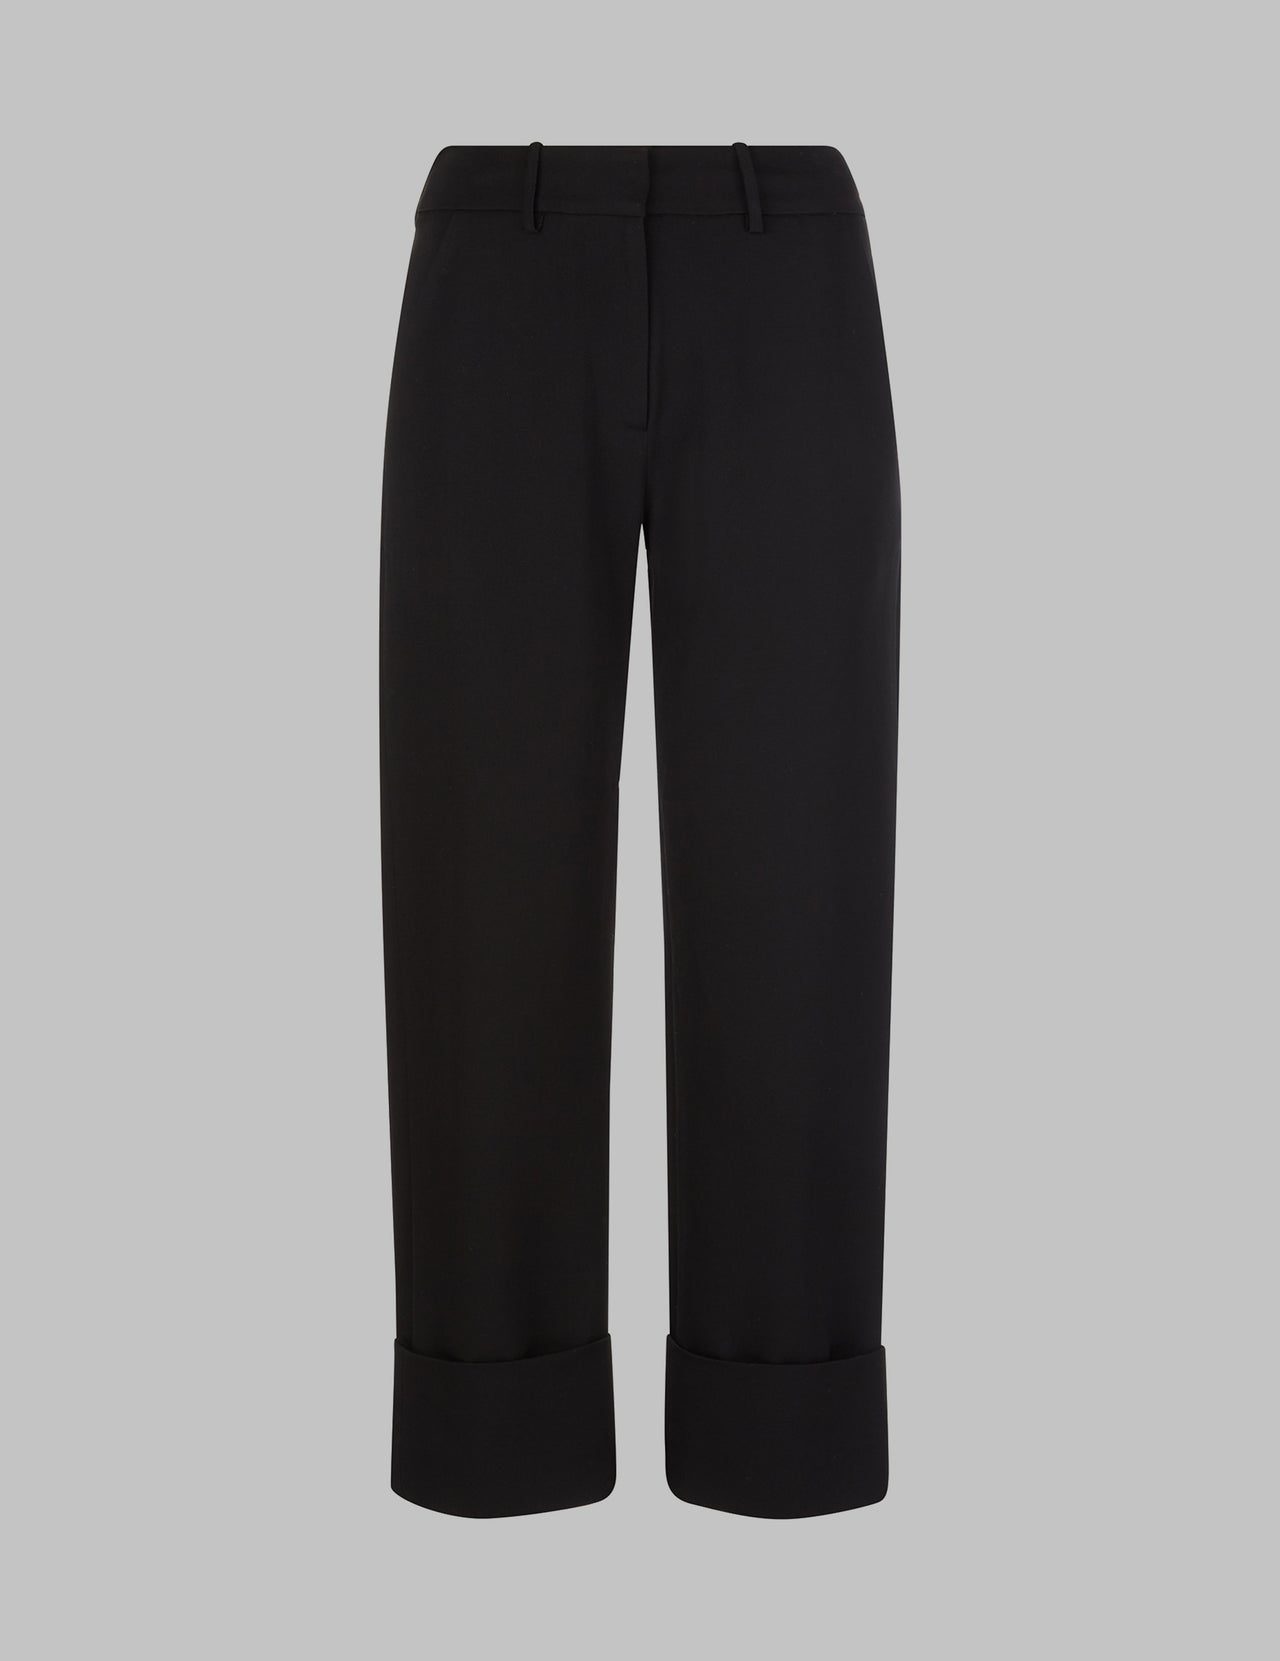  Black Straight Leg Trousers with Cuffs 